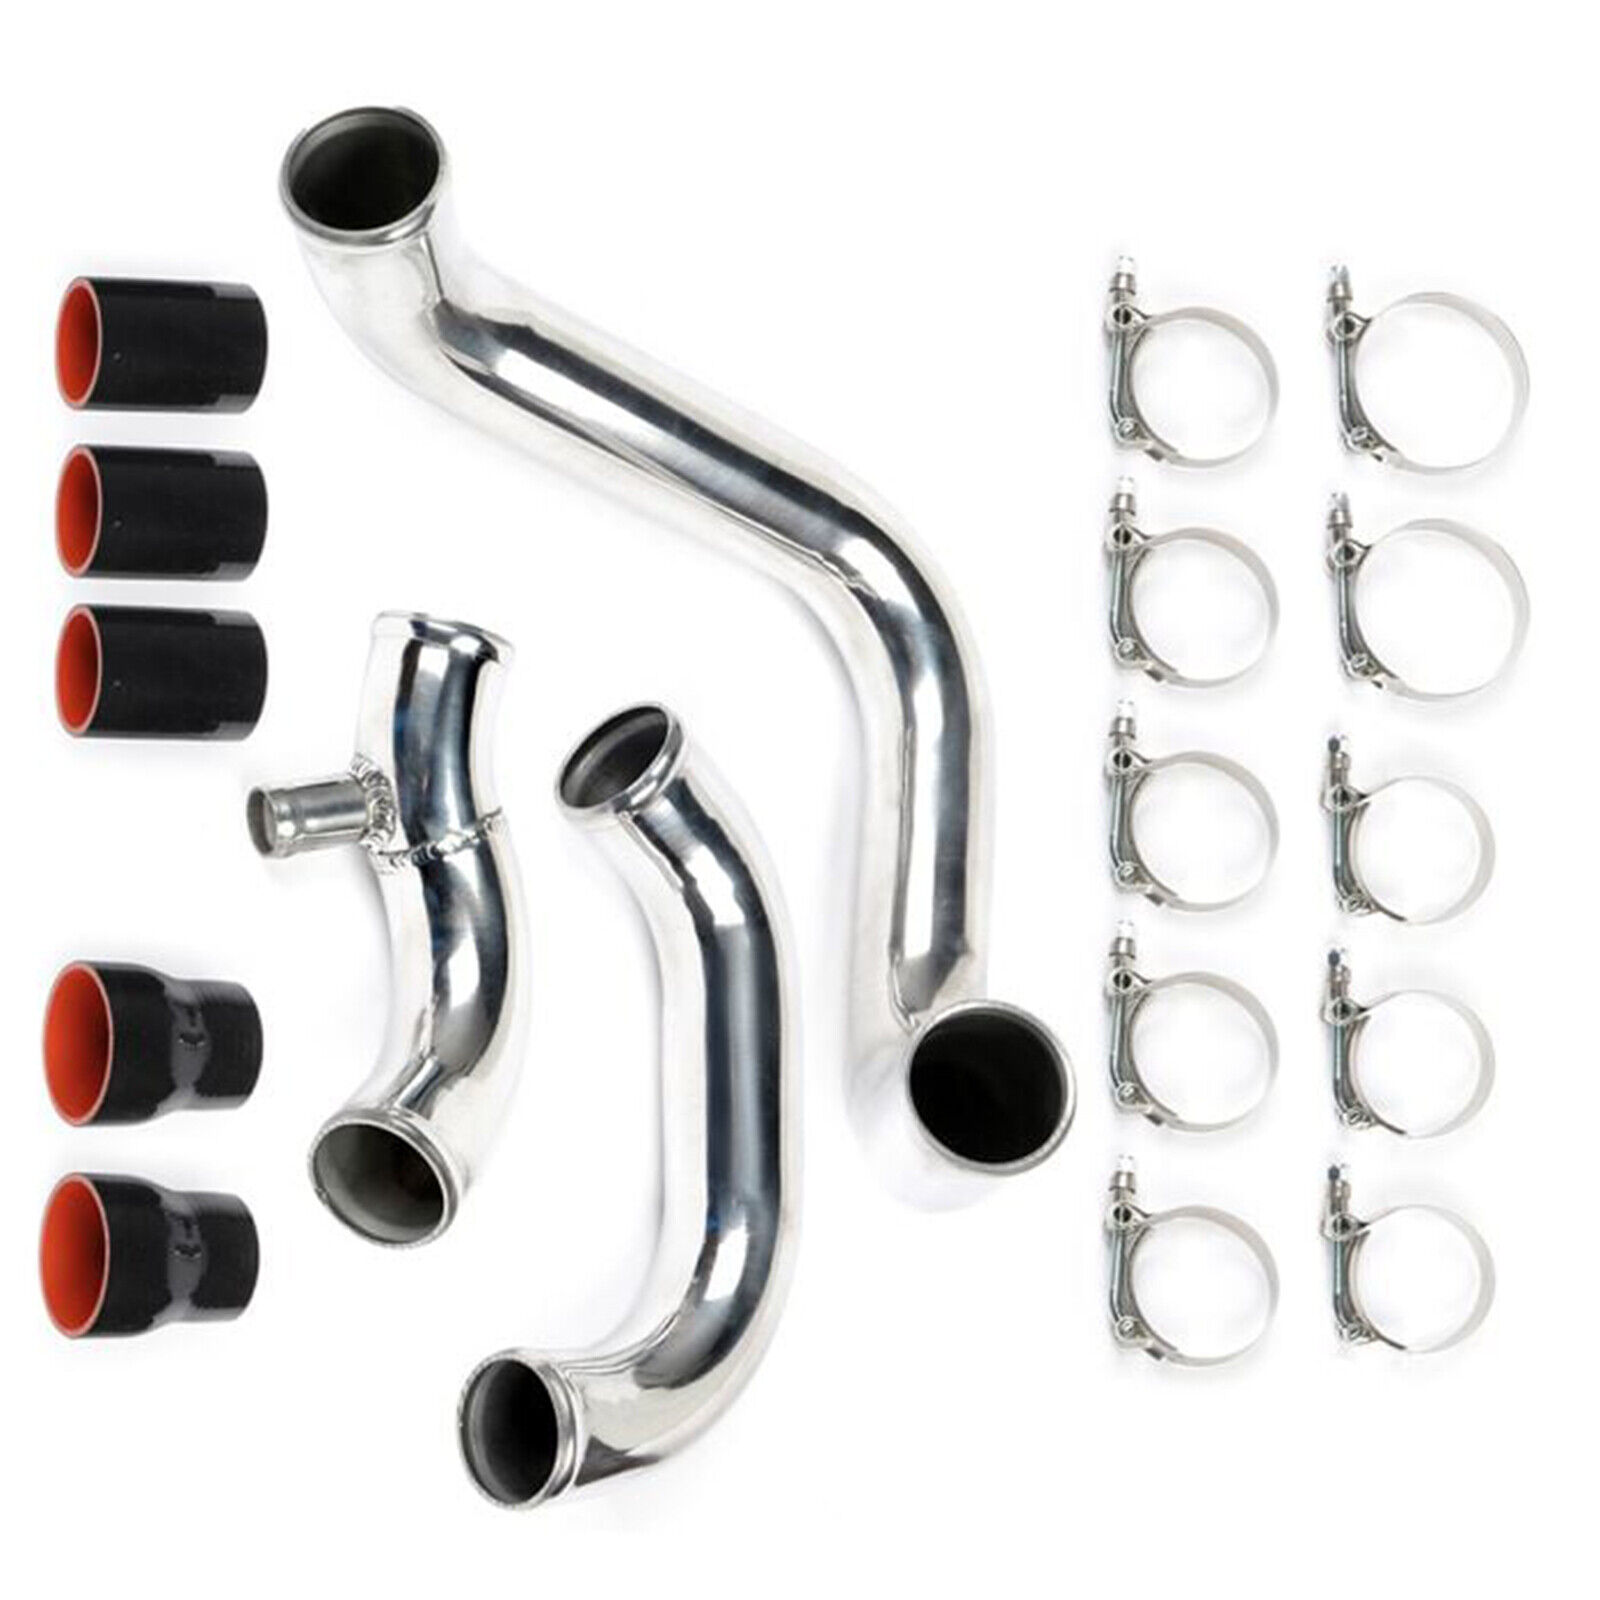 NEW 1× Intercooler Turbo Pipe Kit For Audi A4 & Quattro 1998-2001 / S4 2000-2001